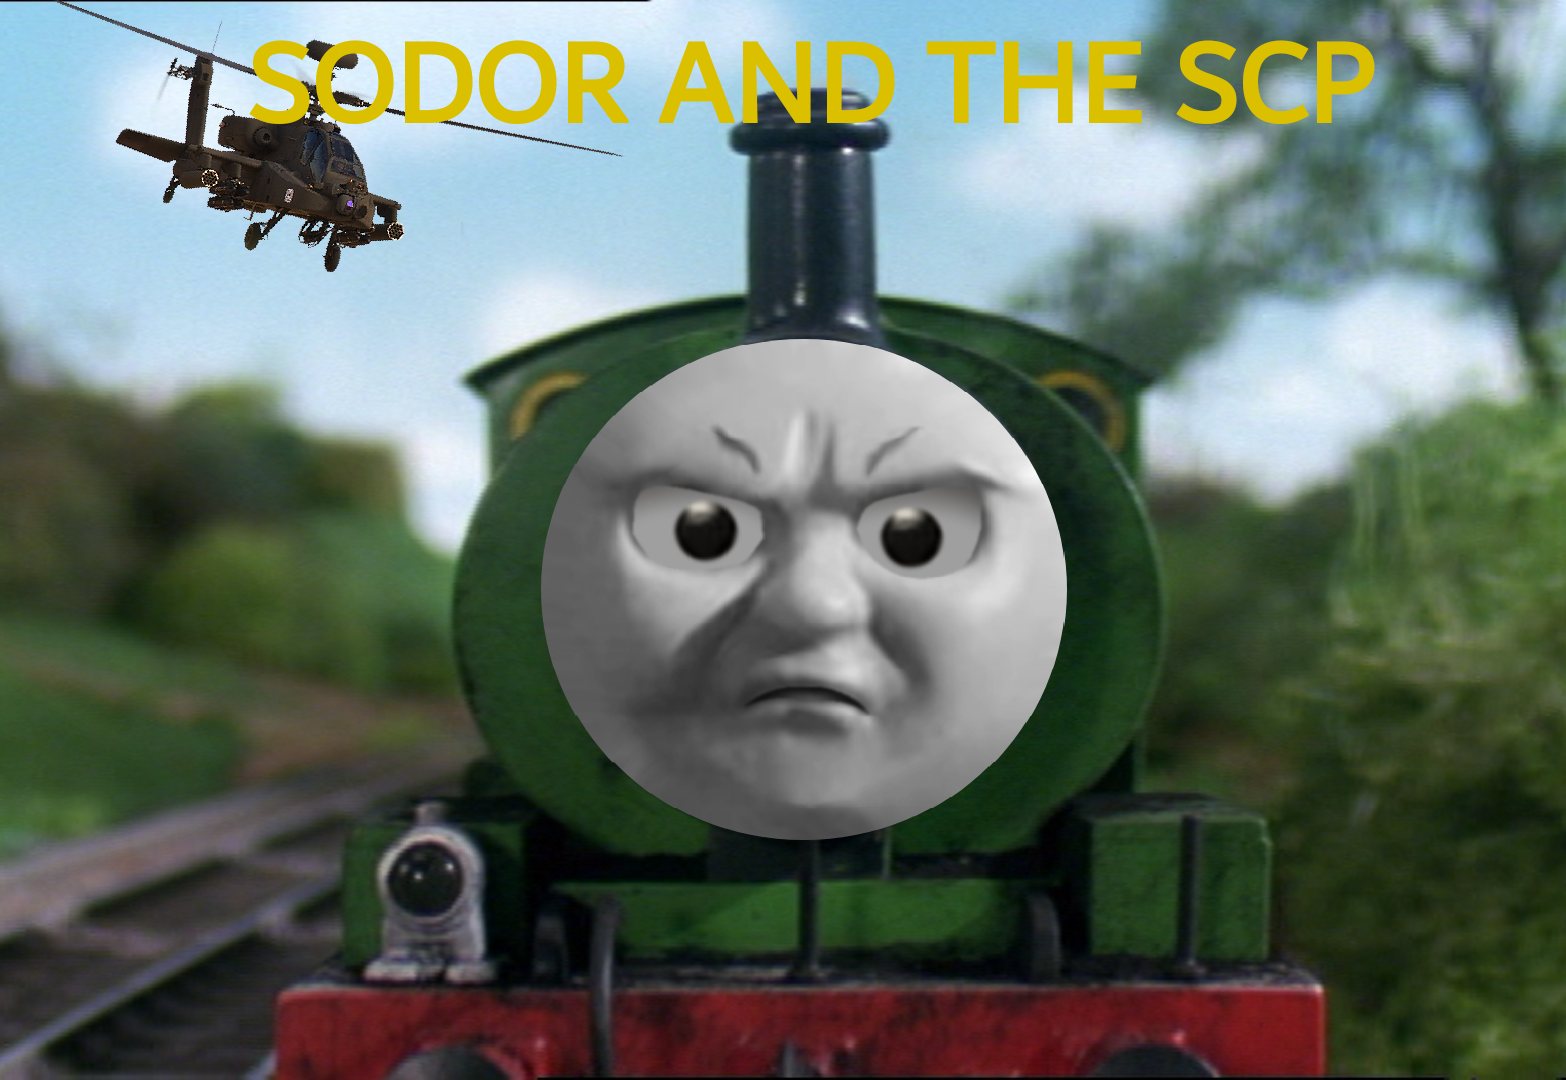 Sodor and the SCP AU Poster by TFSniperBoy22 on DeviantArt